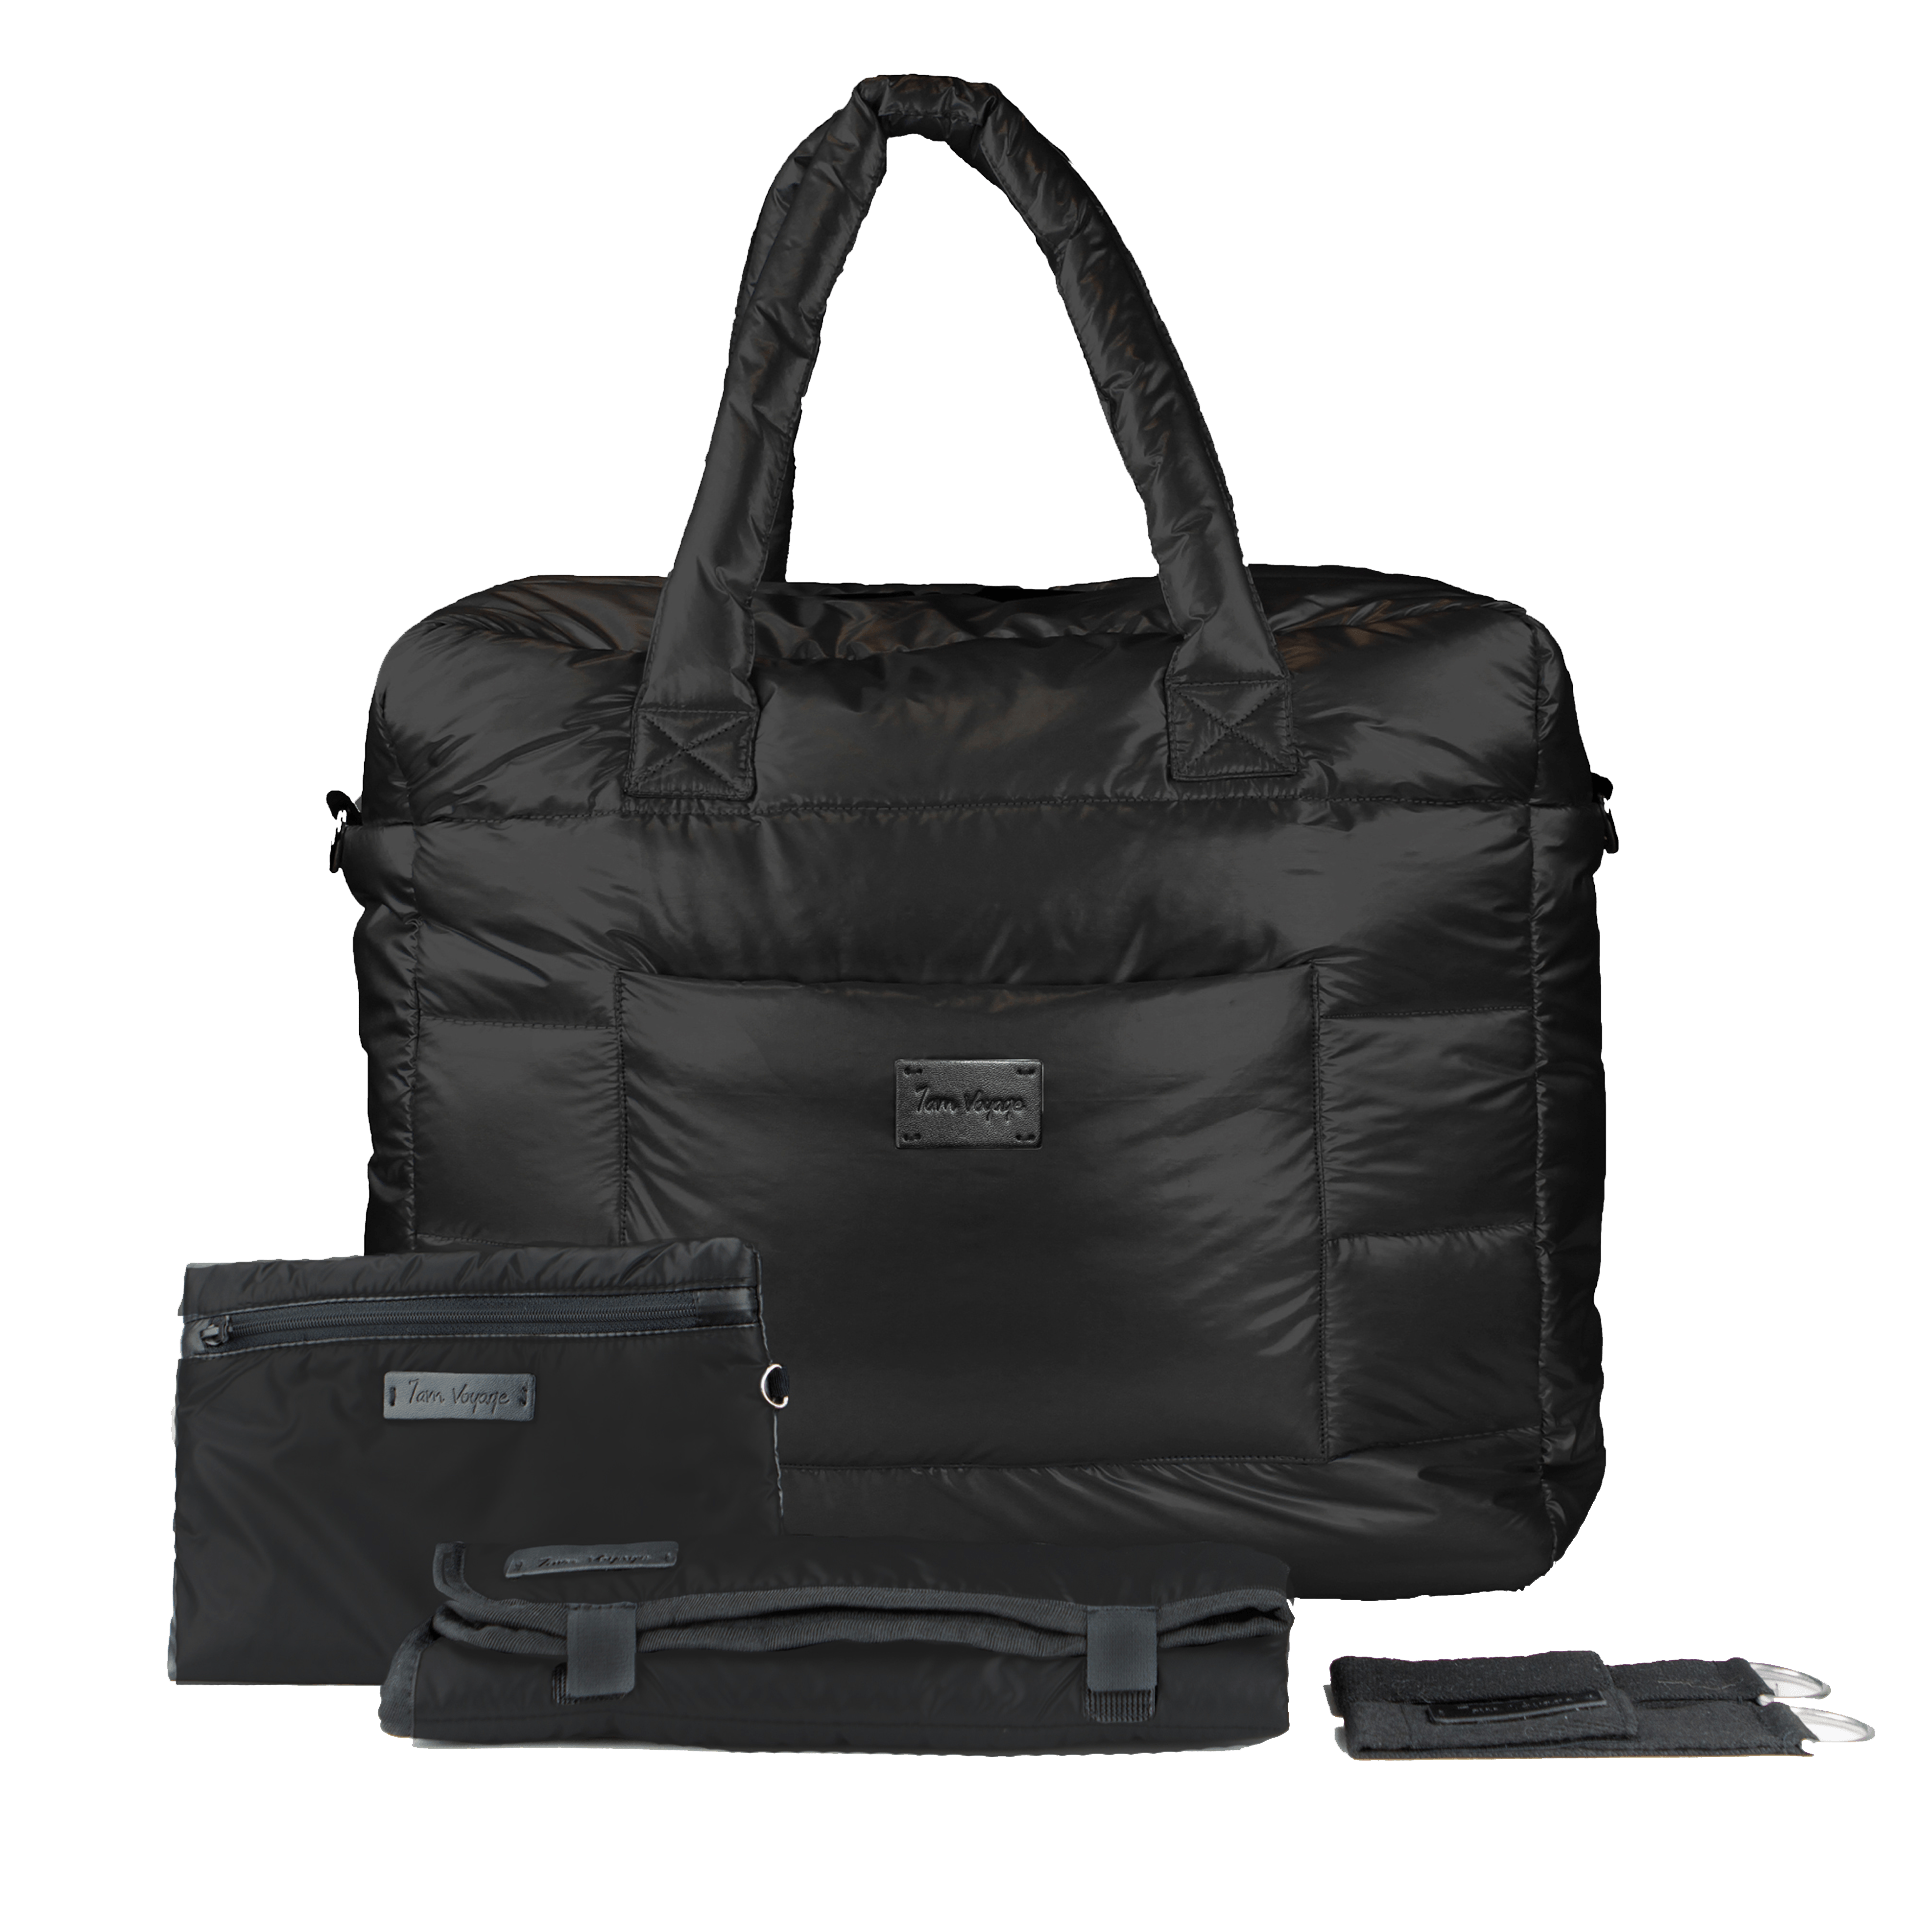 7 AM Plaza Weekend Diaper Bag, -- ANB Baby